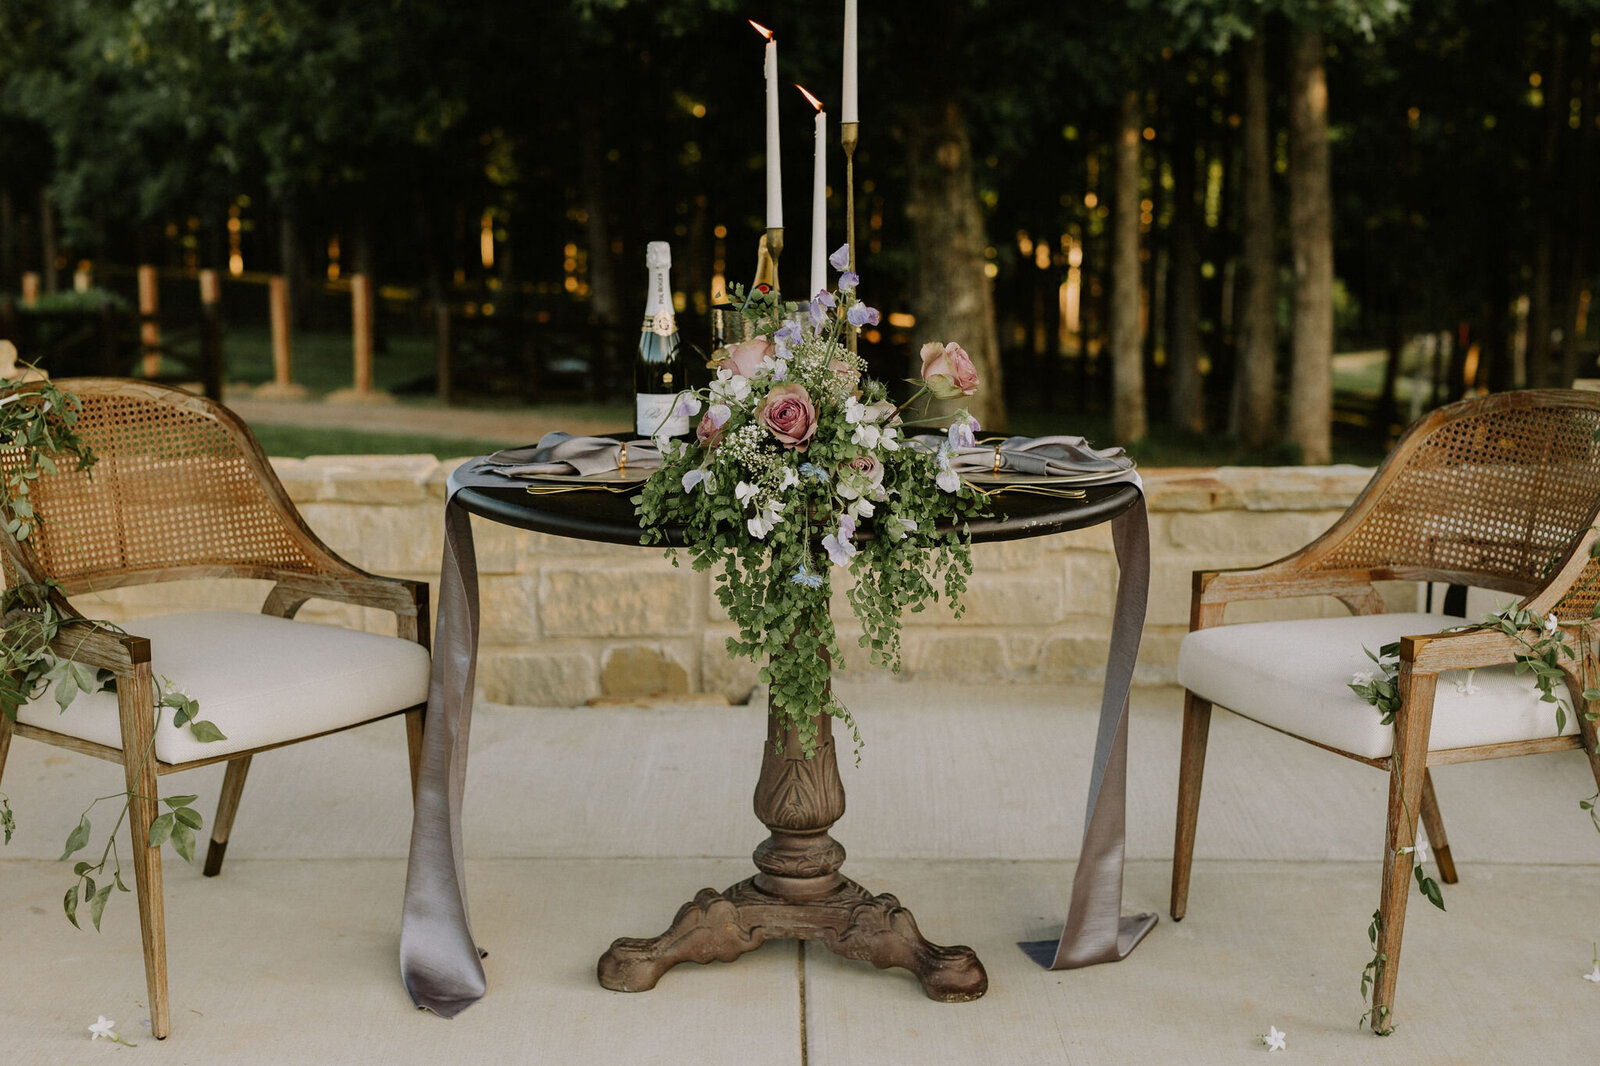 A sweetheart table with candles and flowers.